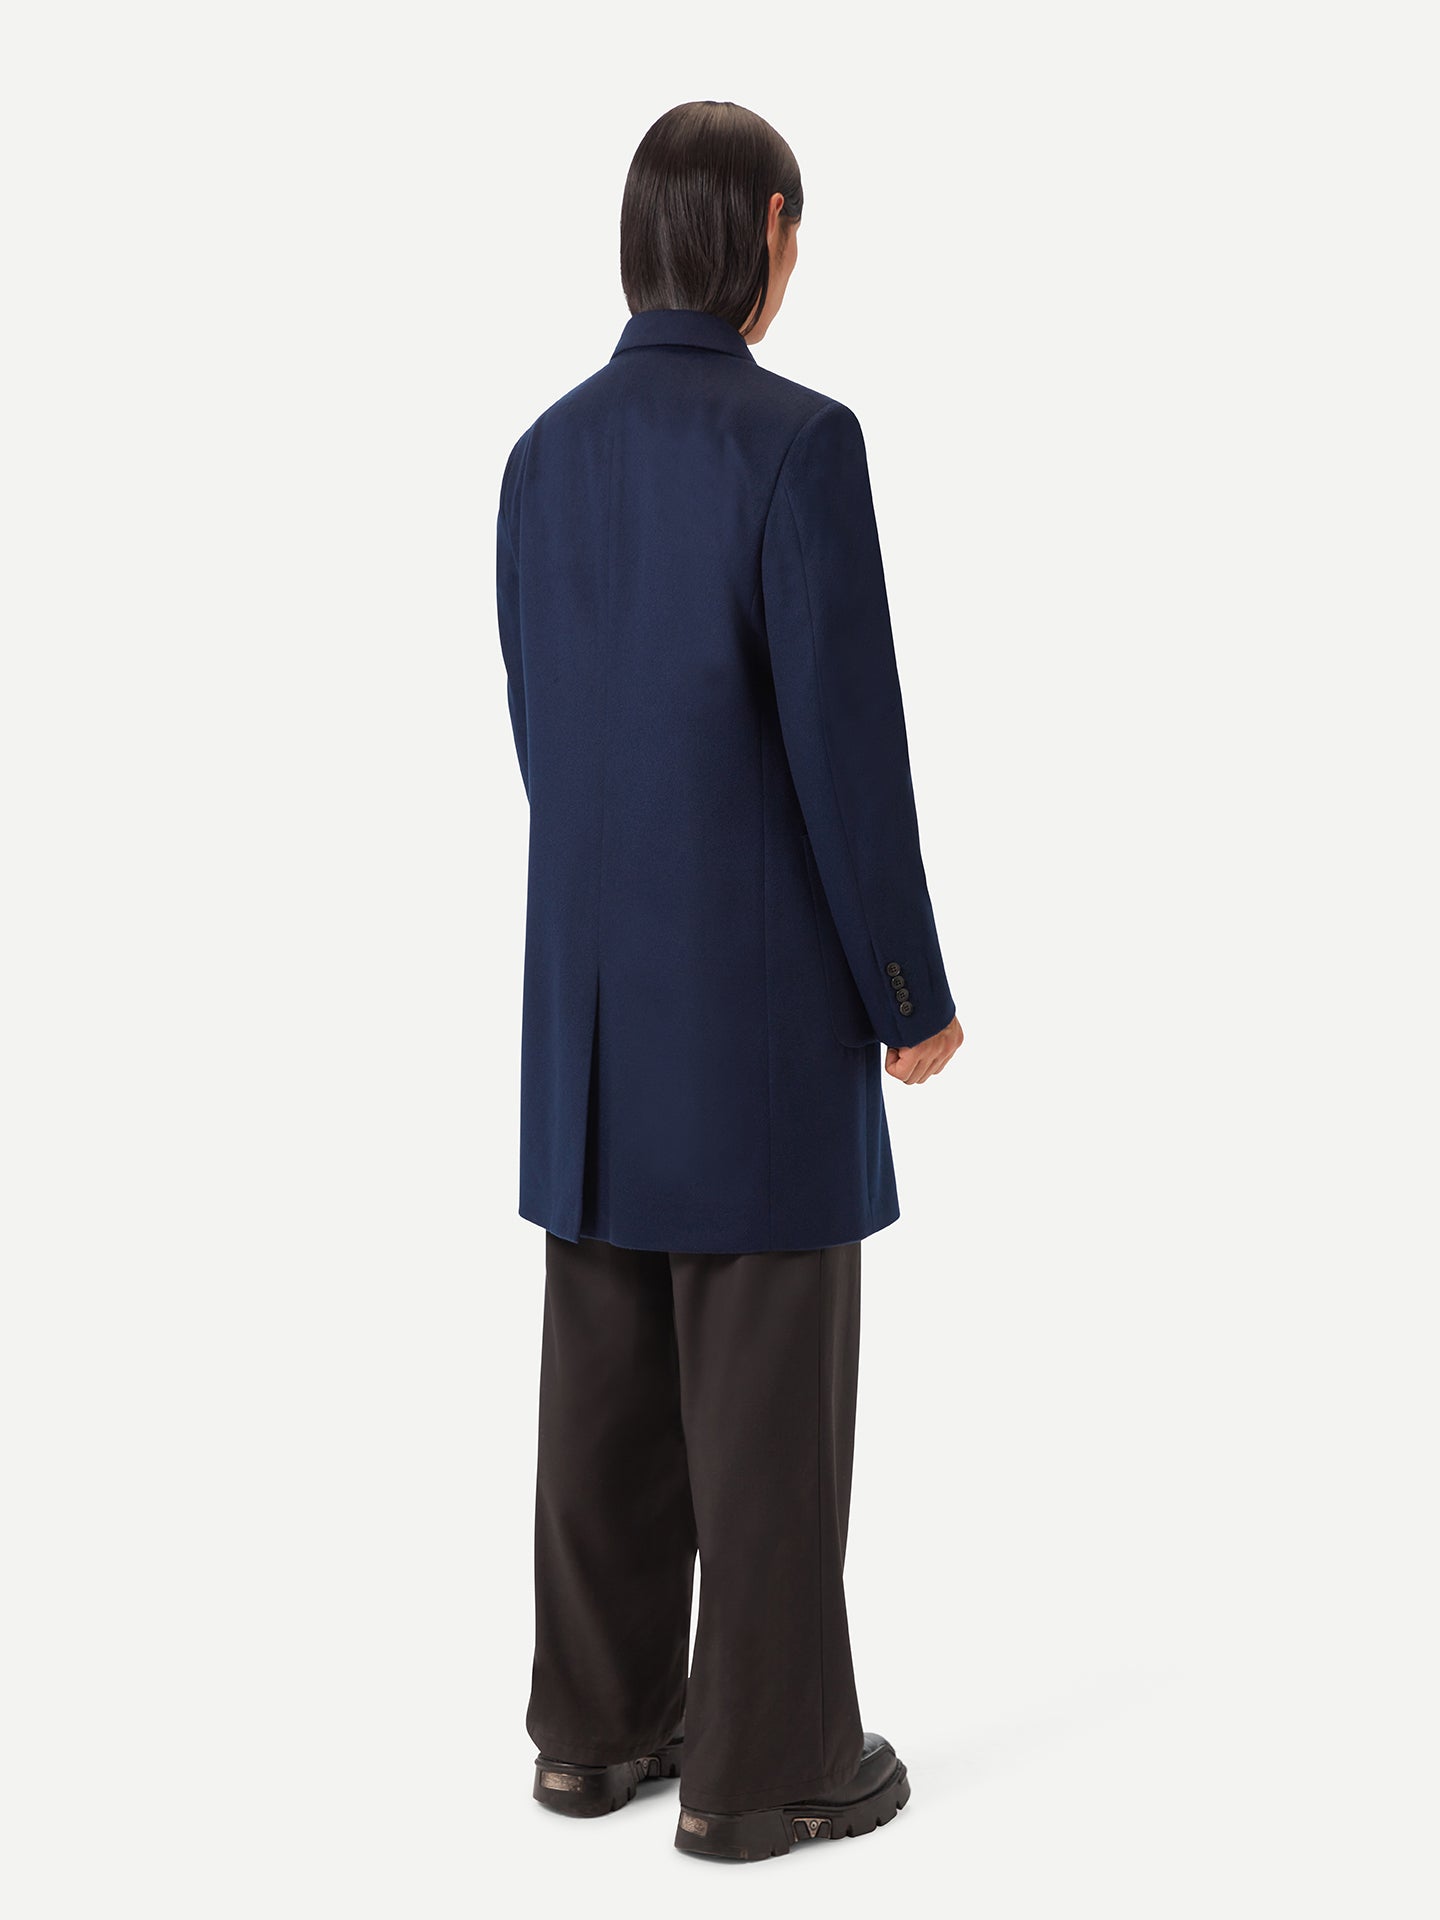 Men's Double-Breasted Cashmere Coat Navy - Gobi Cashmere